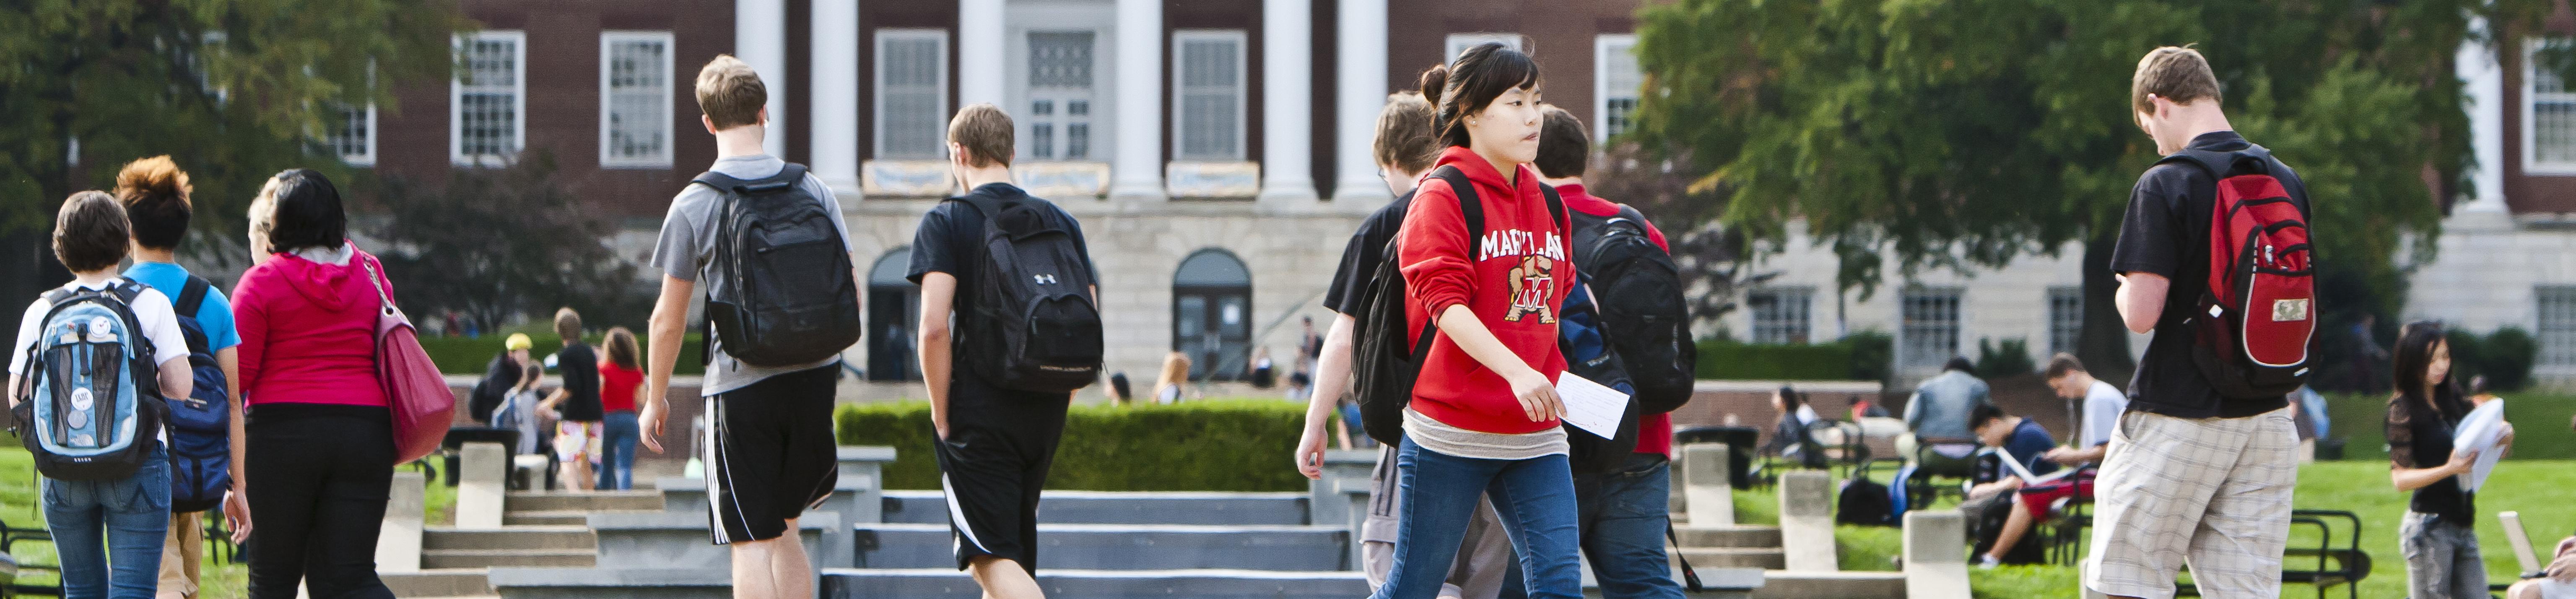 Students walking in front of the fountain in McKeldin Mall